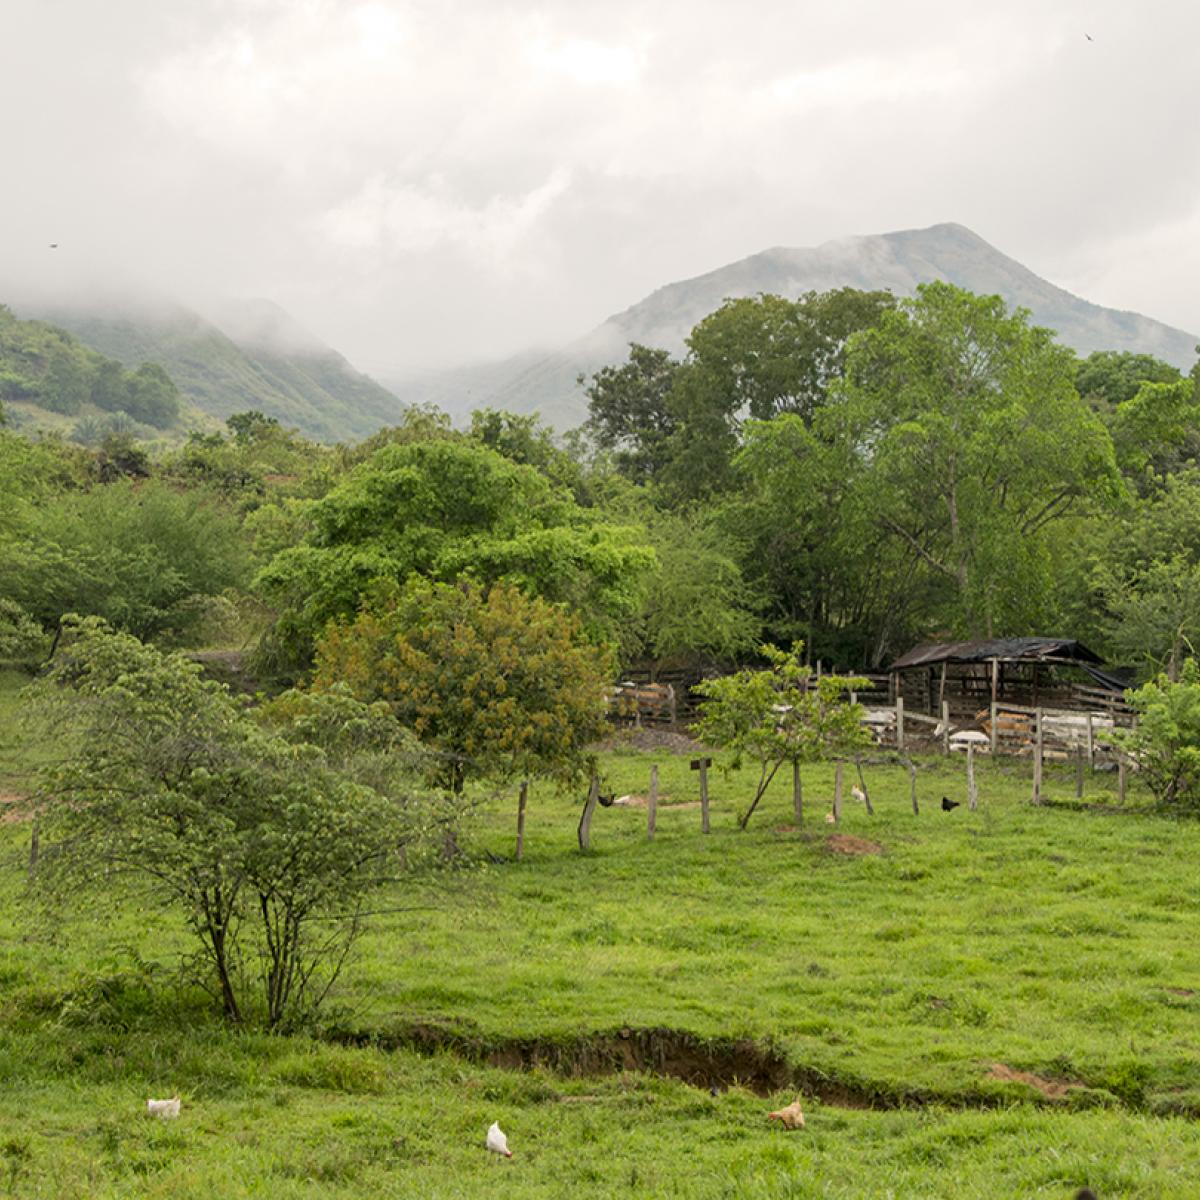 Rural property in front of mountain range.